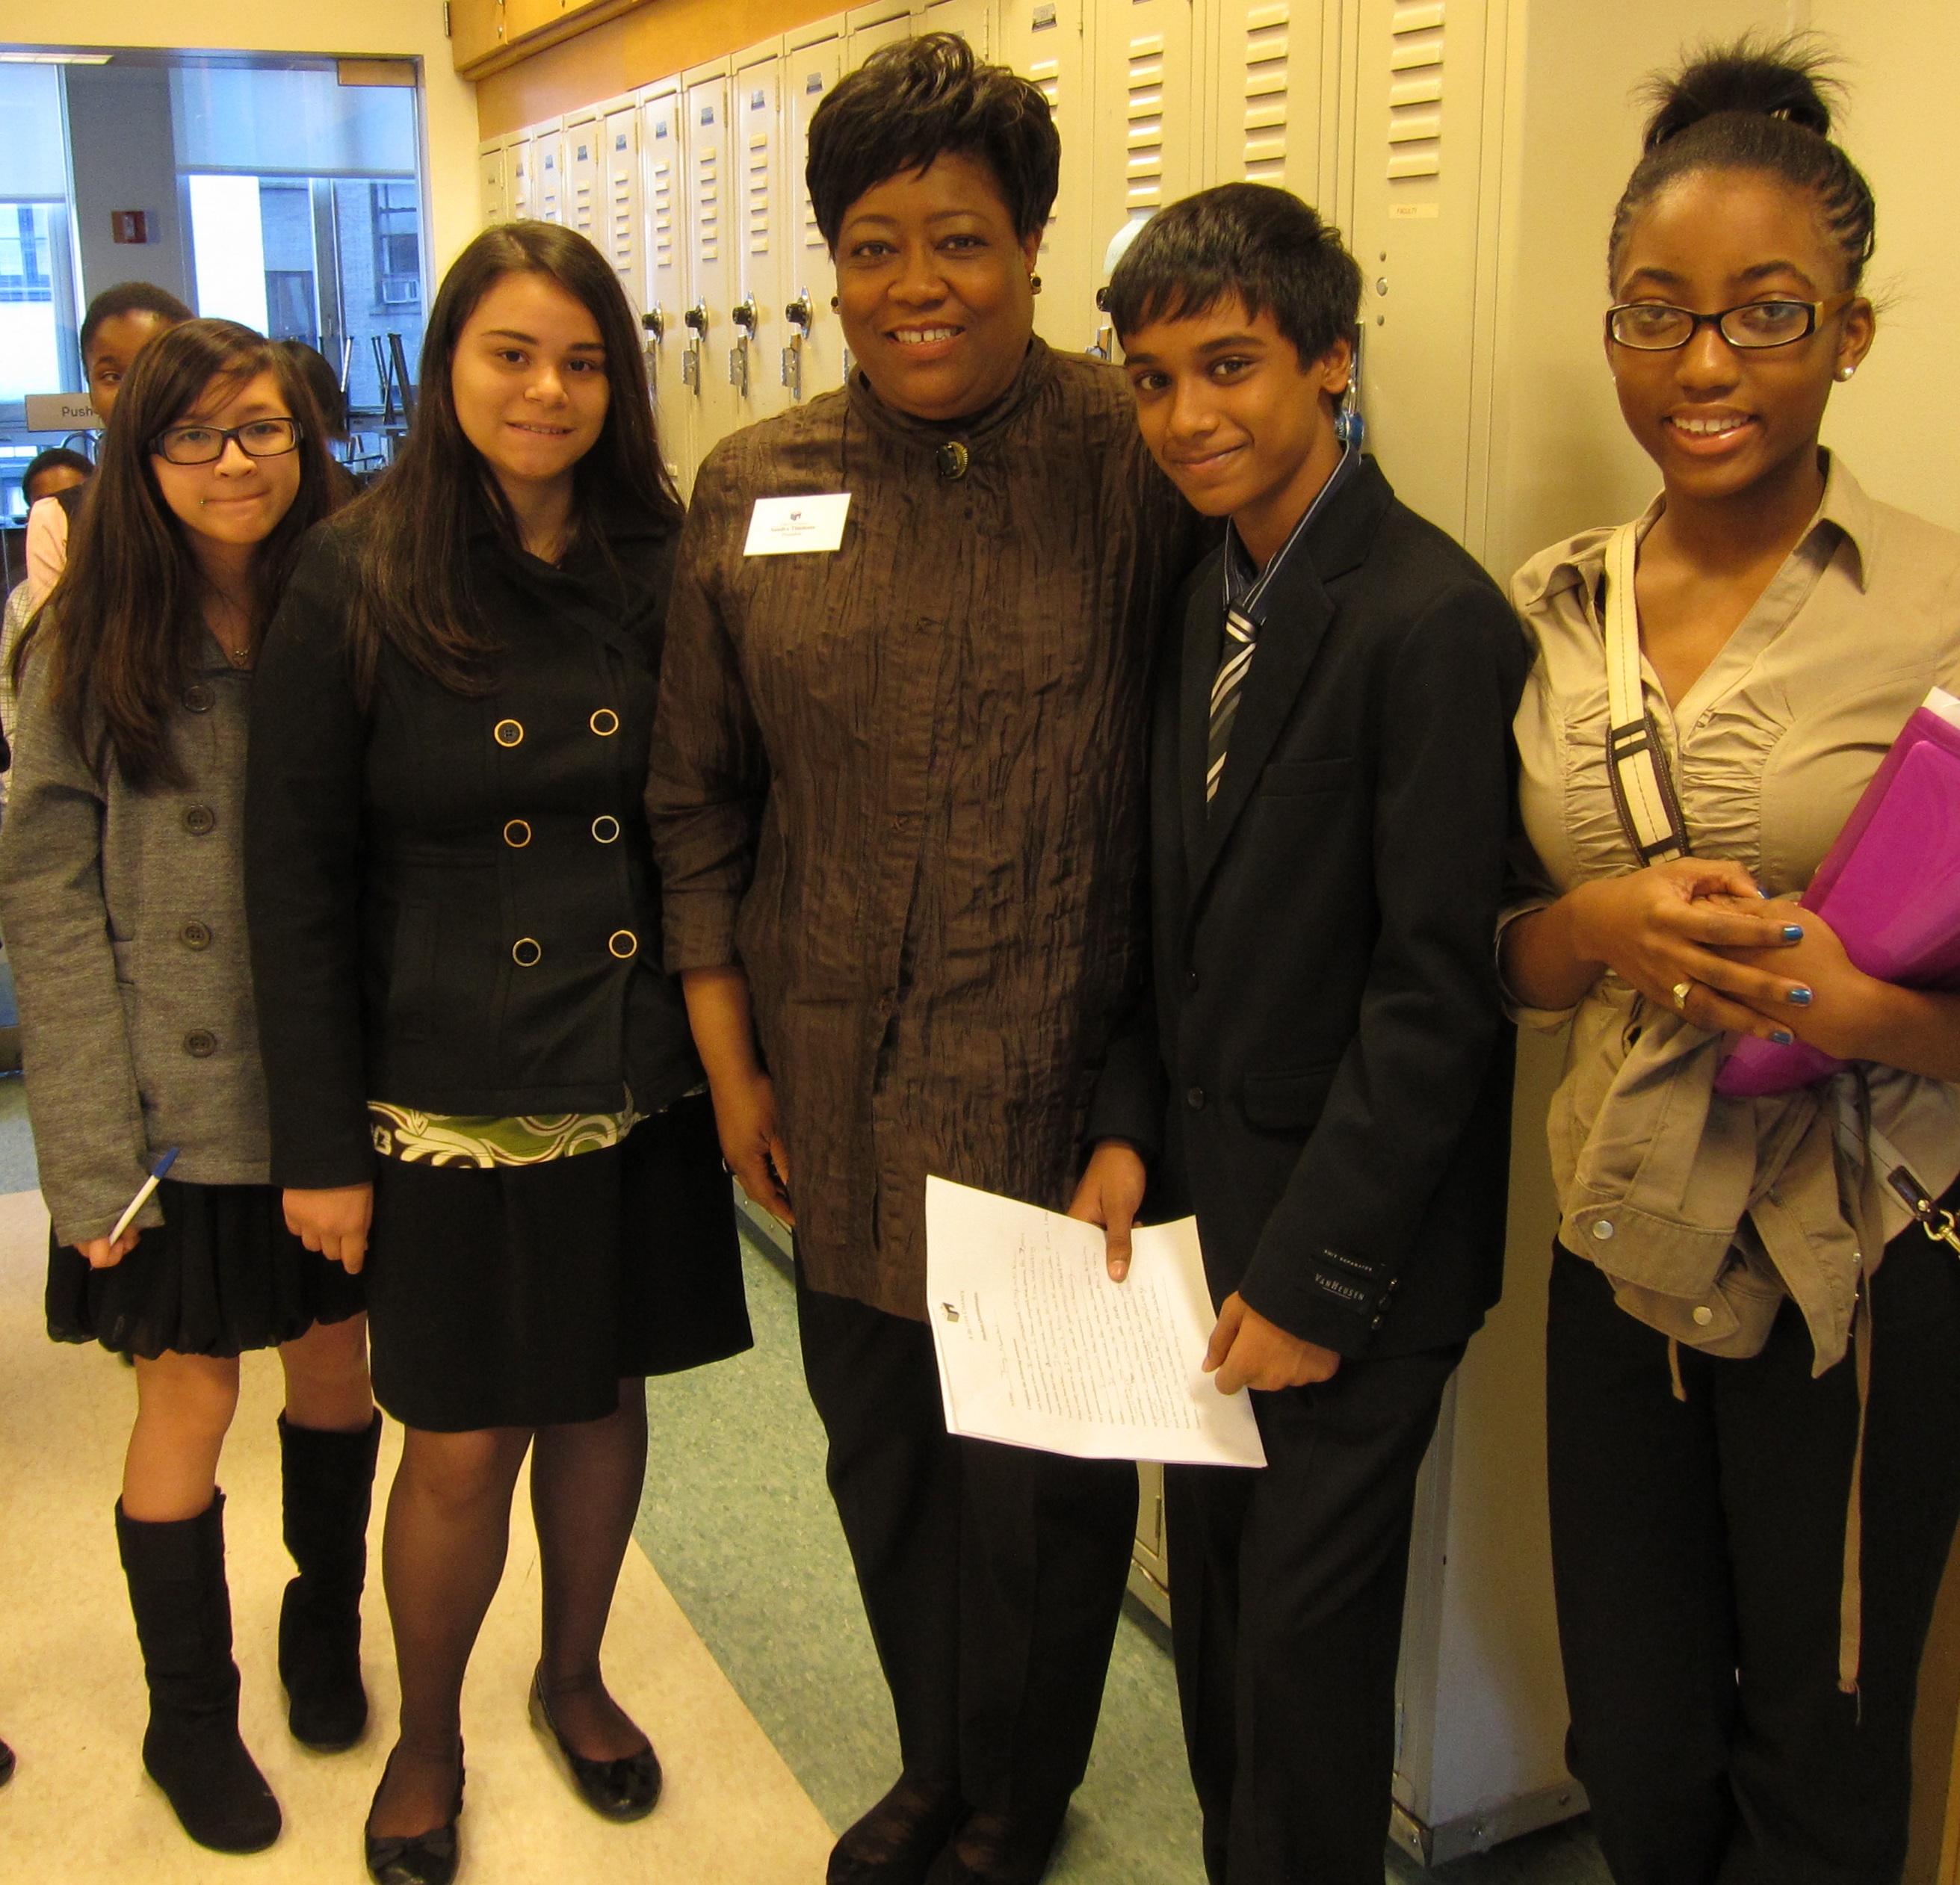 sandra-e-timmons-and-students-from-the-better-chance-program.jpg 